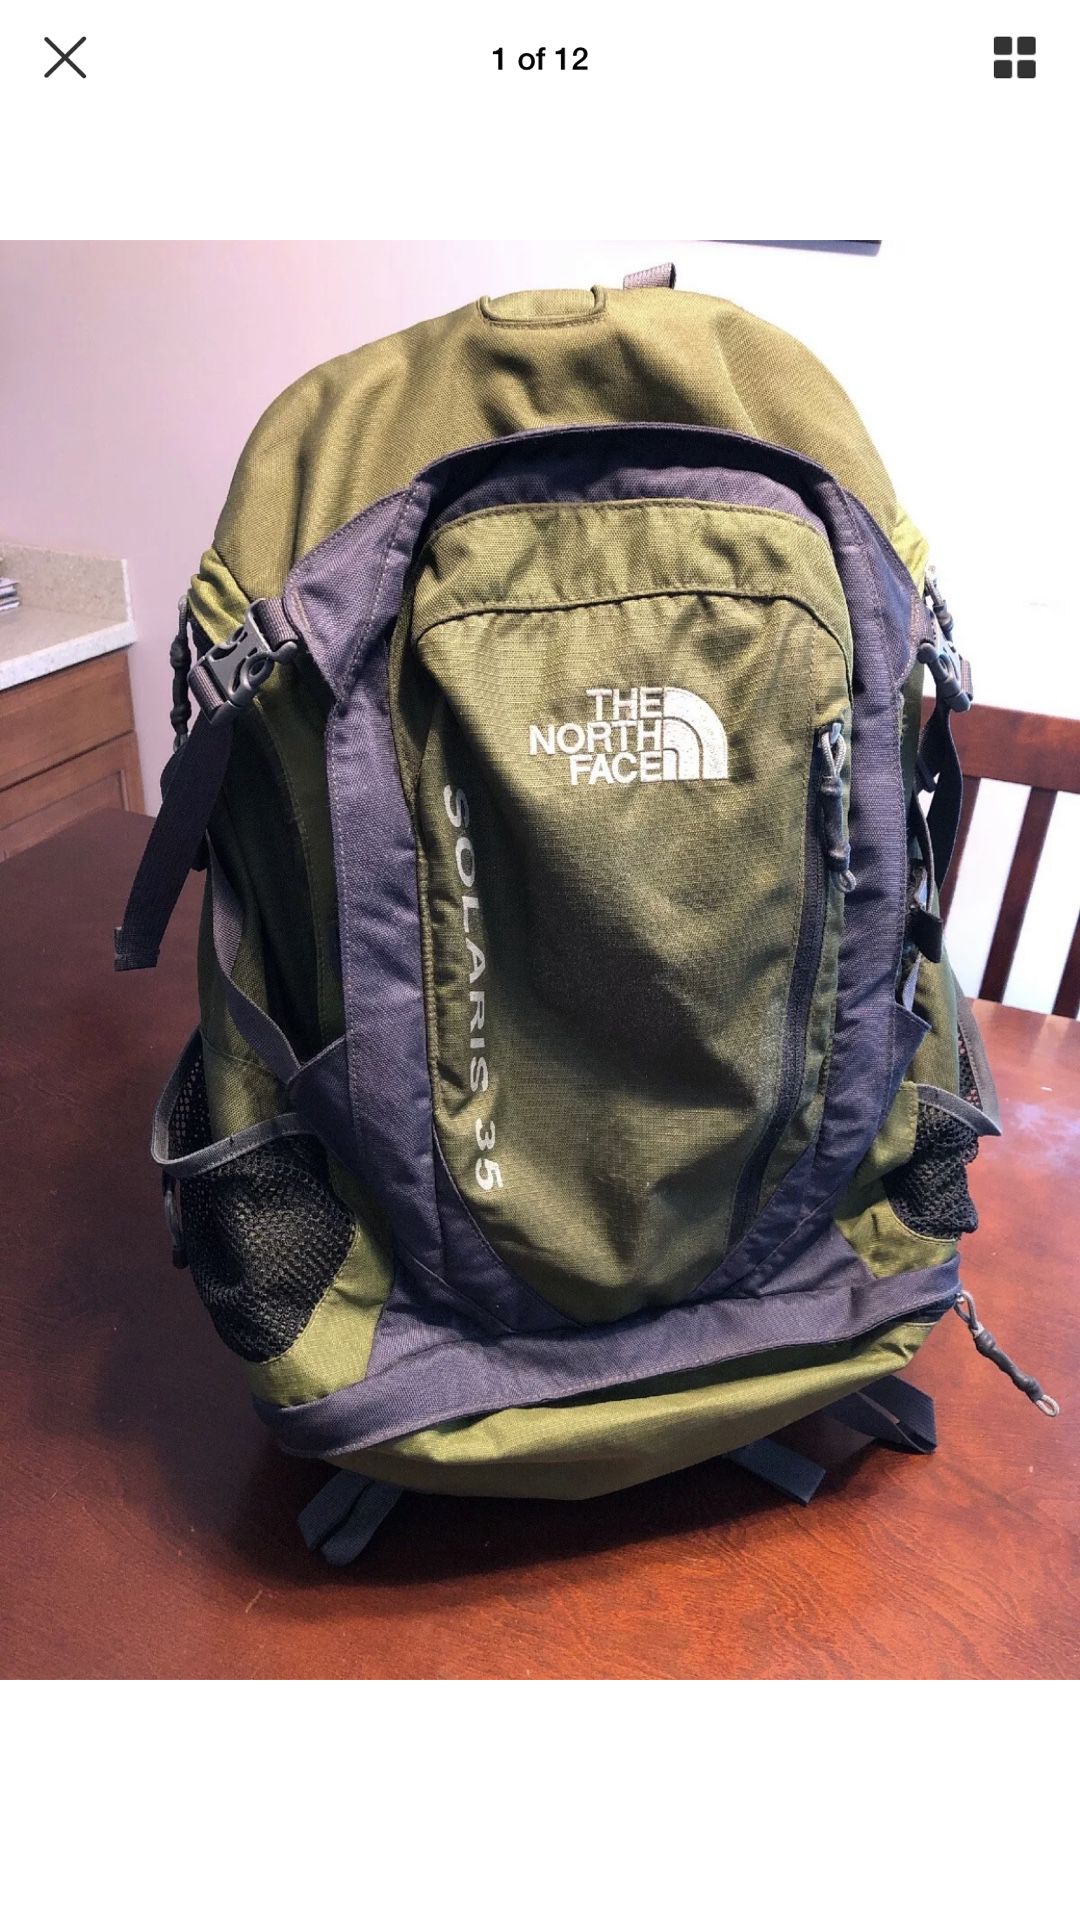 The North Face Solaris 35 Black Green Hiking Camping Outdoor Adventure Backpack